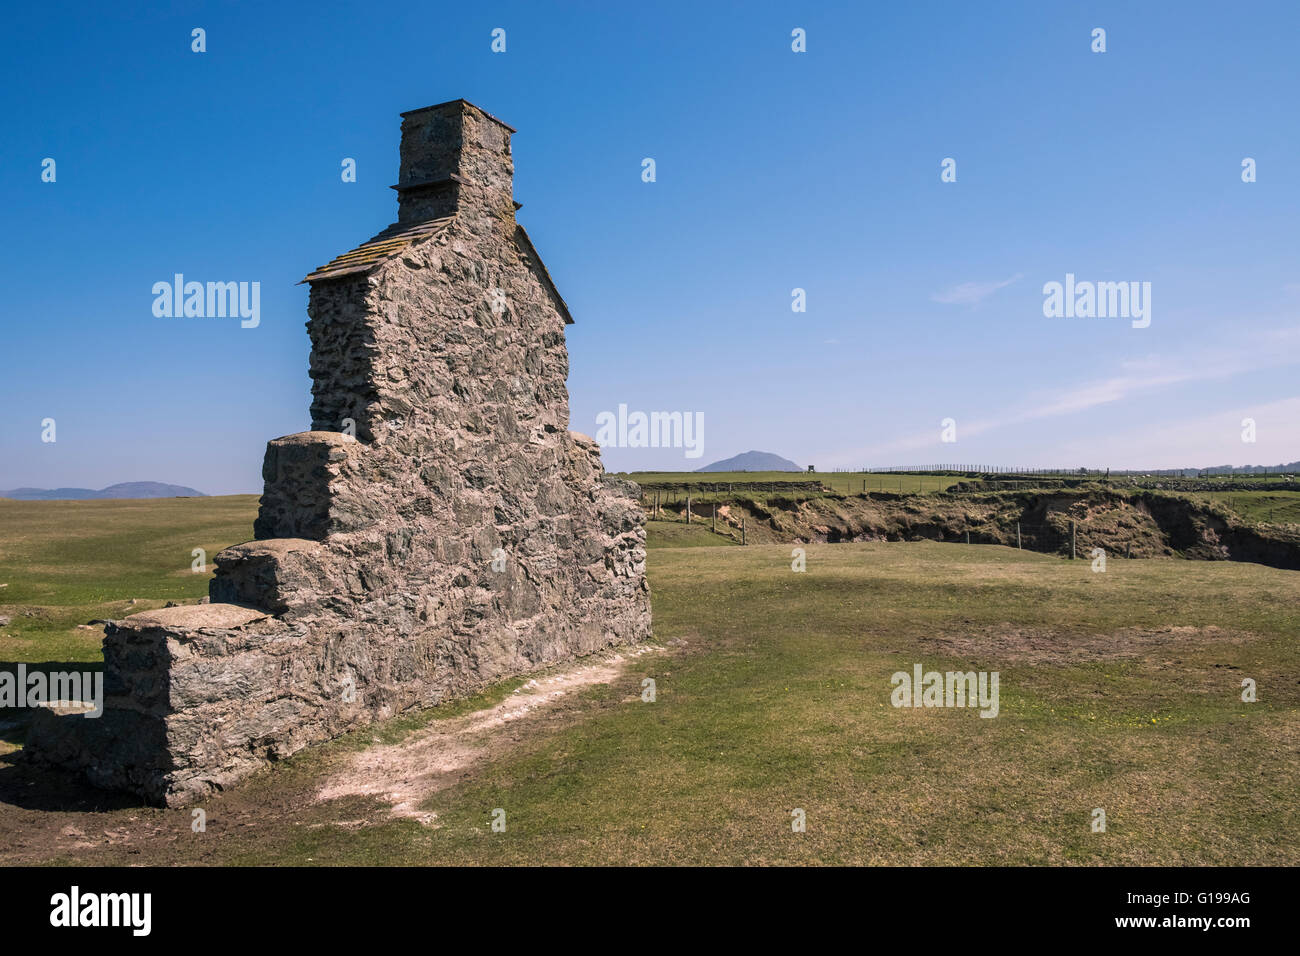 Remains of ruined cottage on remote north wales coast, Gwynedd, Wales, UK Stock Photo